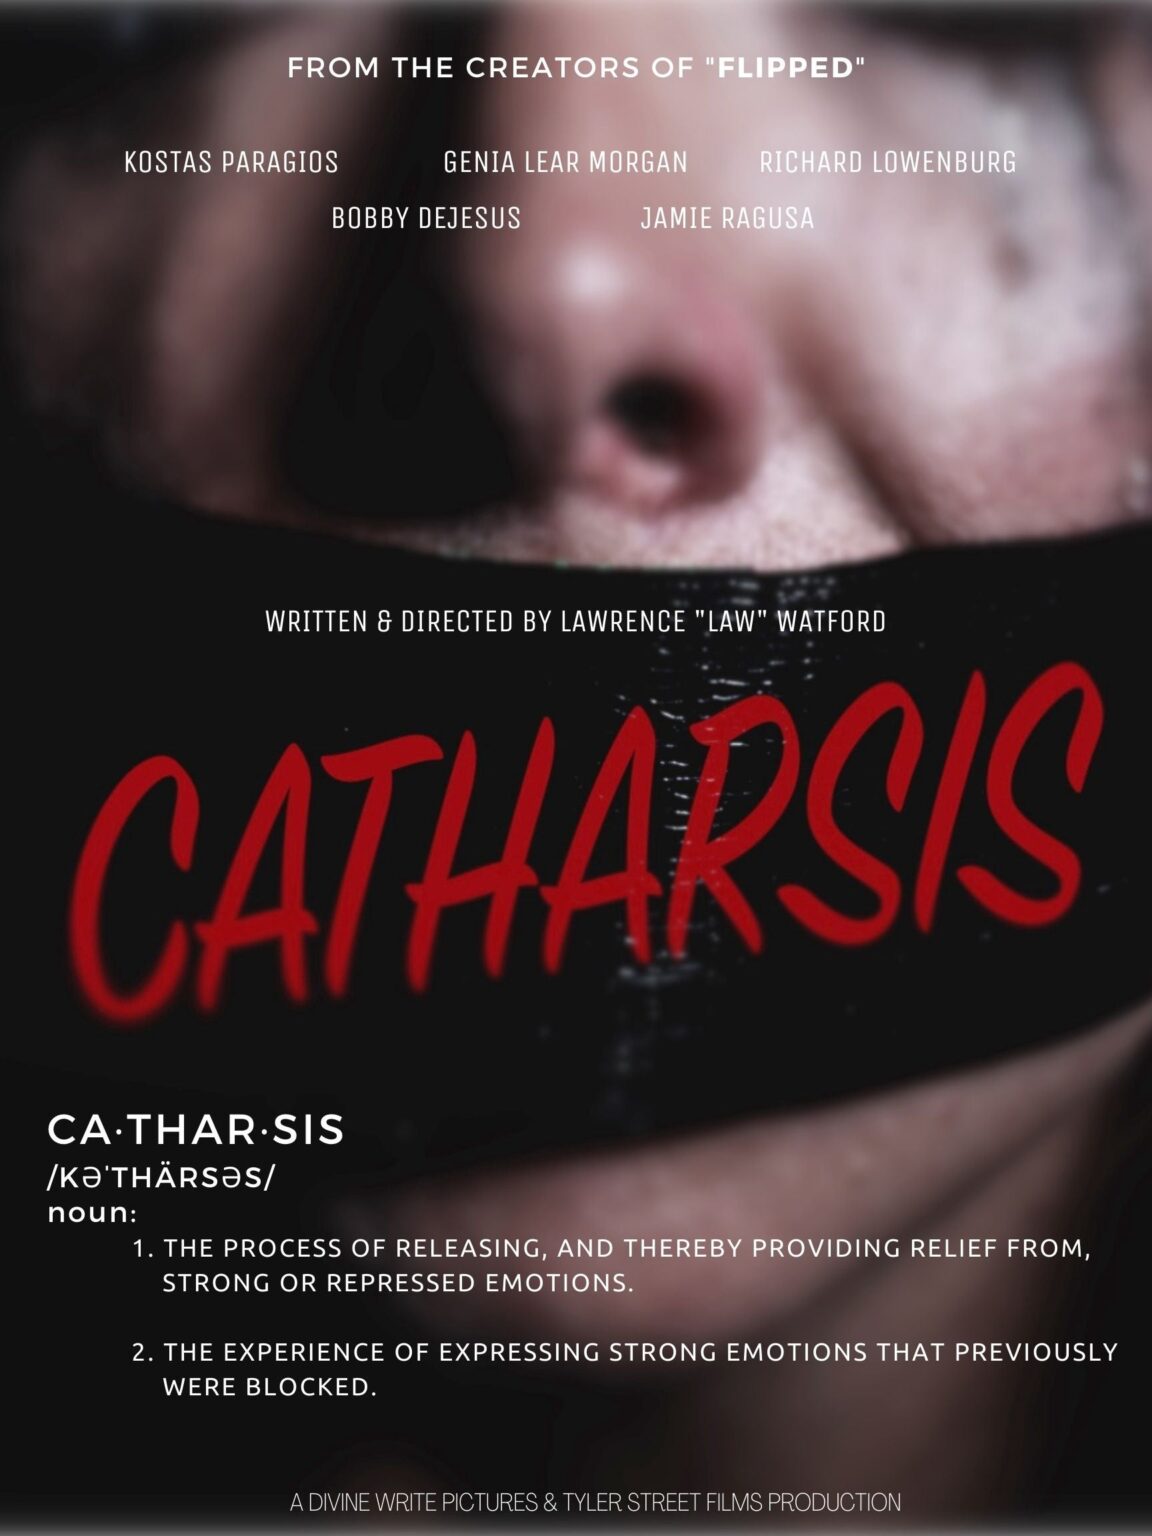 'Catharsis' is a short film by director Lawrence 'Law' Watford. Find out what the film and the director have to say about police brutality.